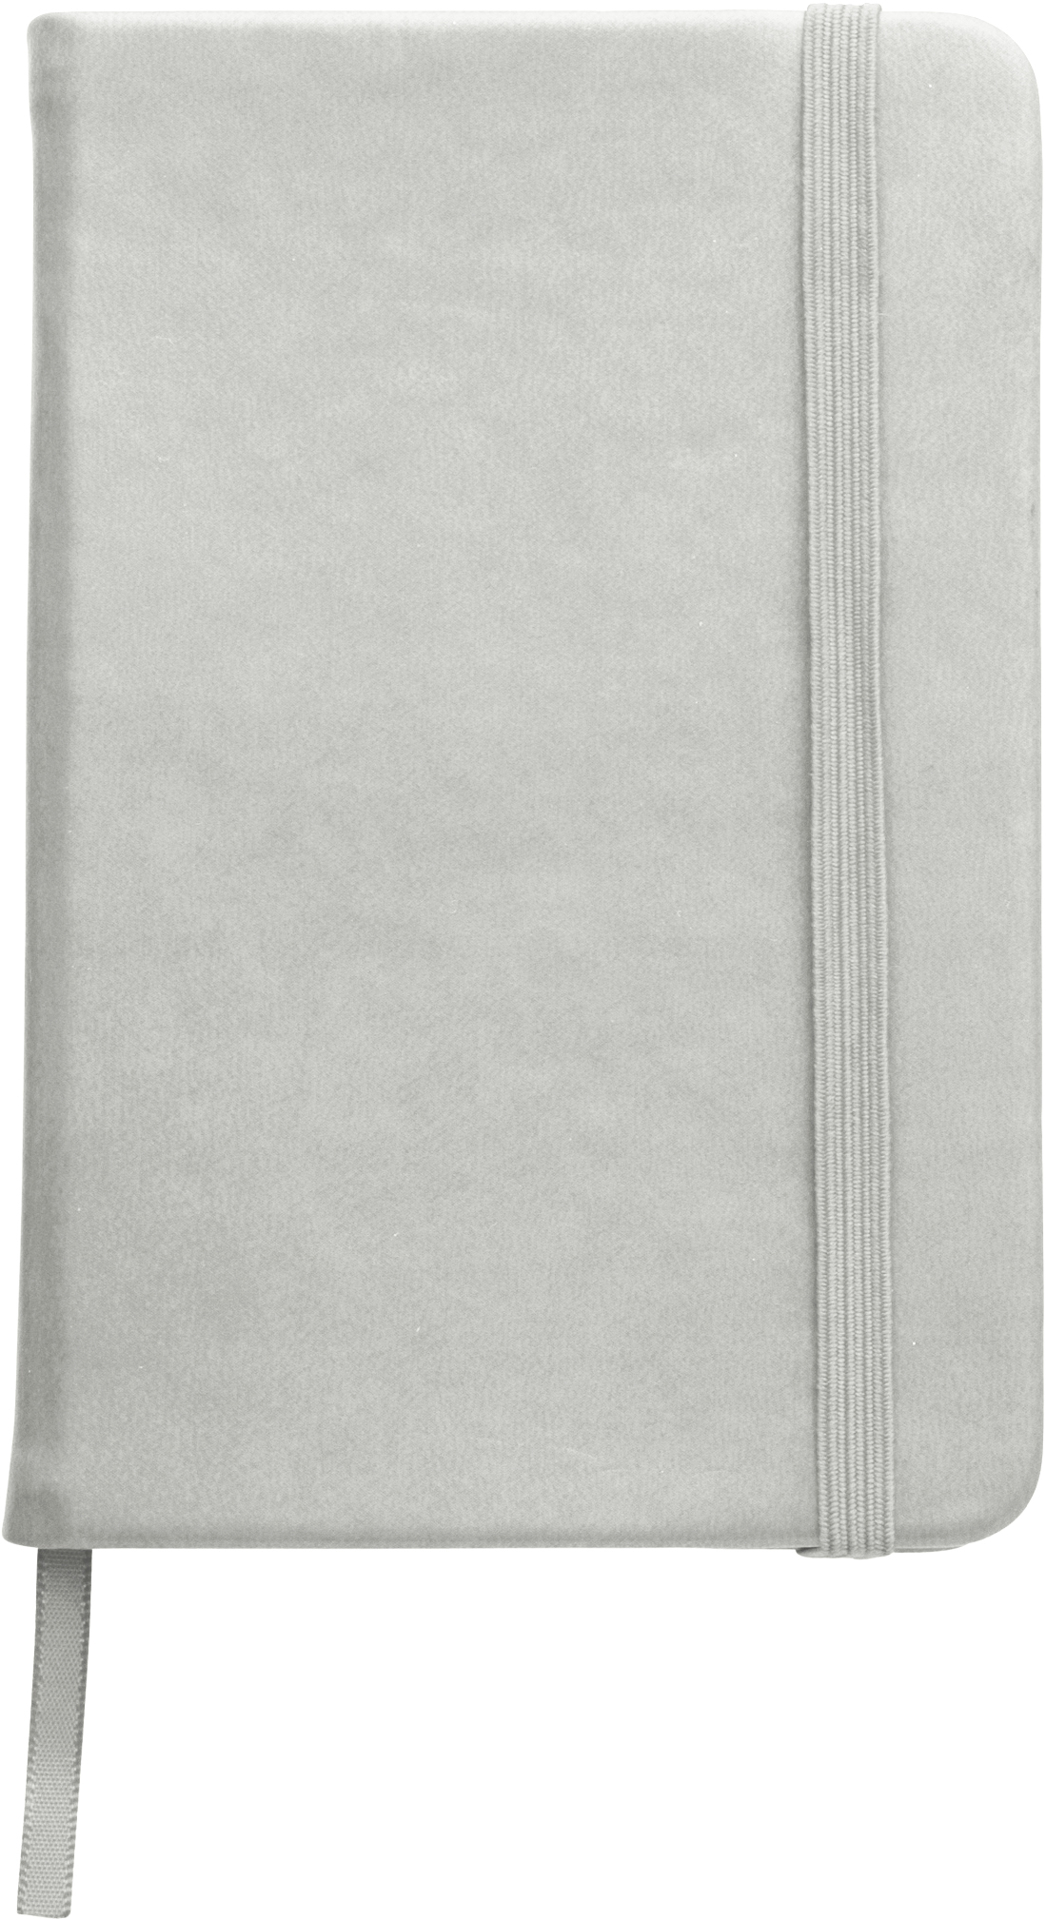 A6 Notebook with soft PU cover in silver